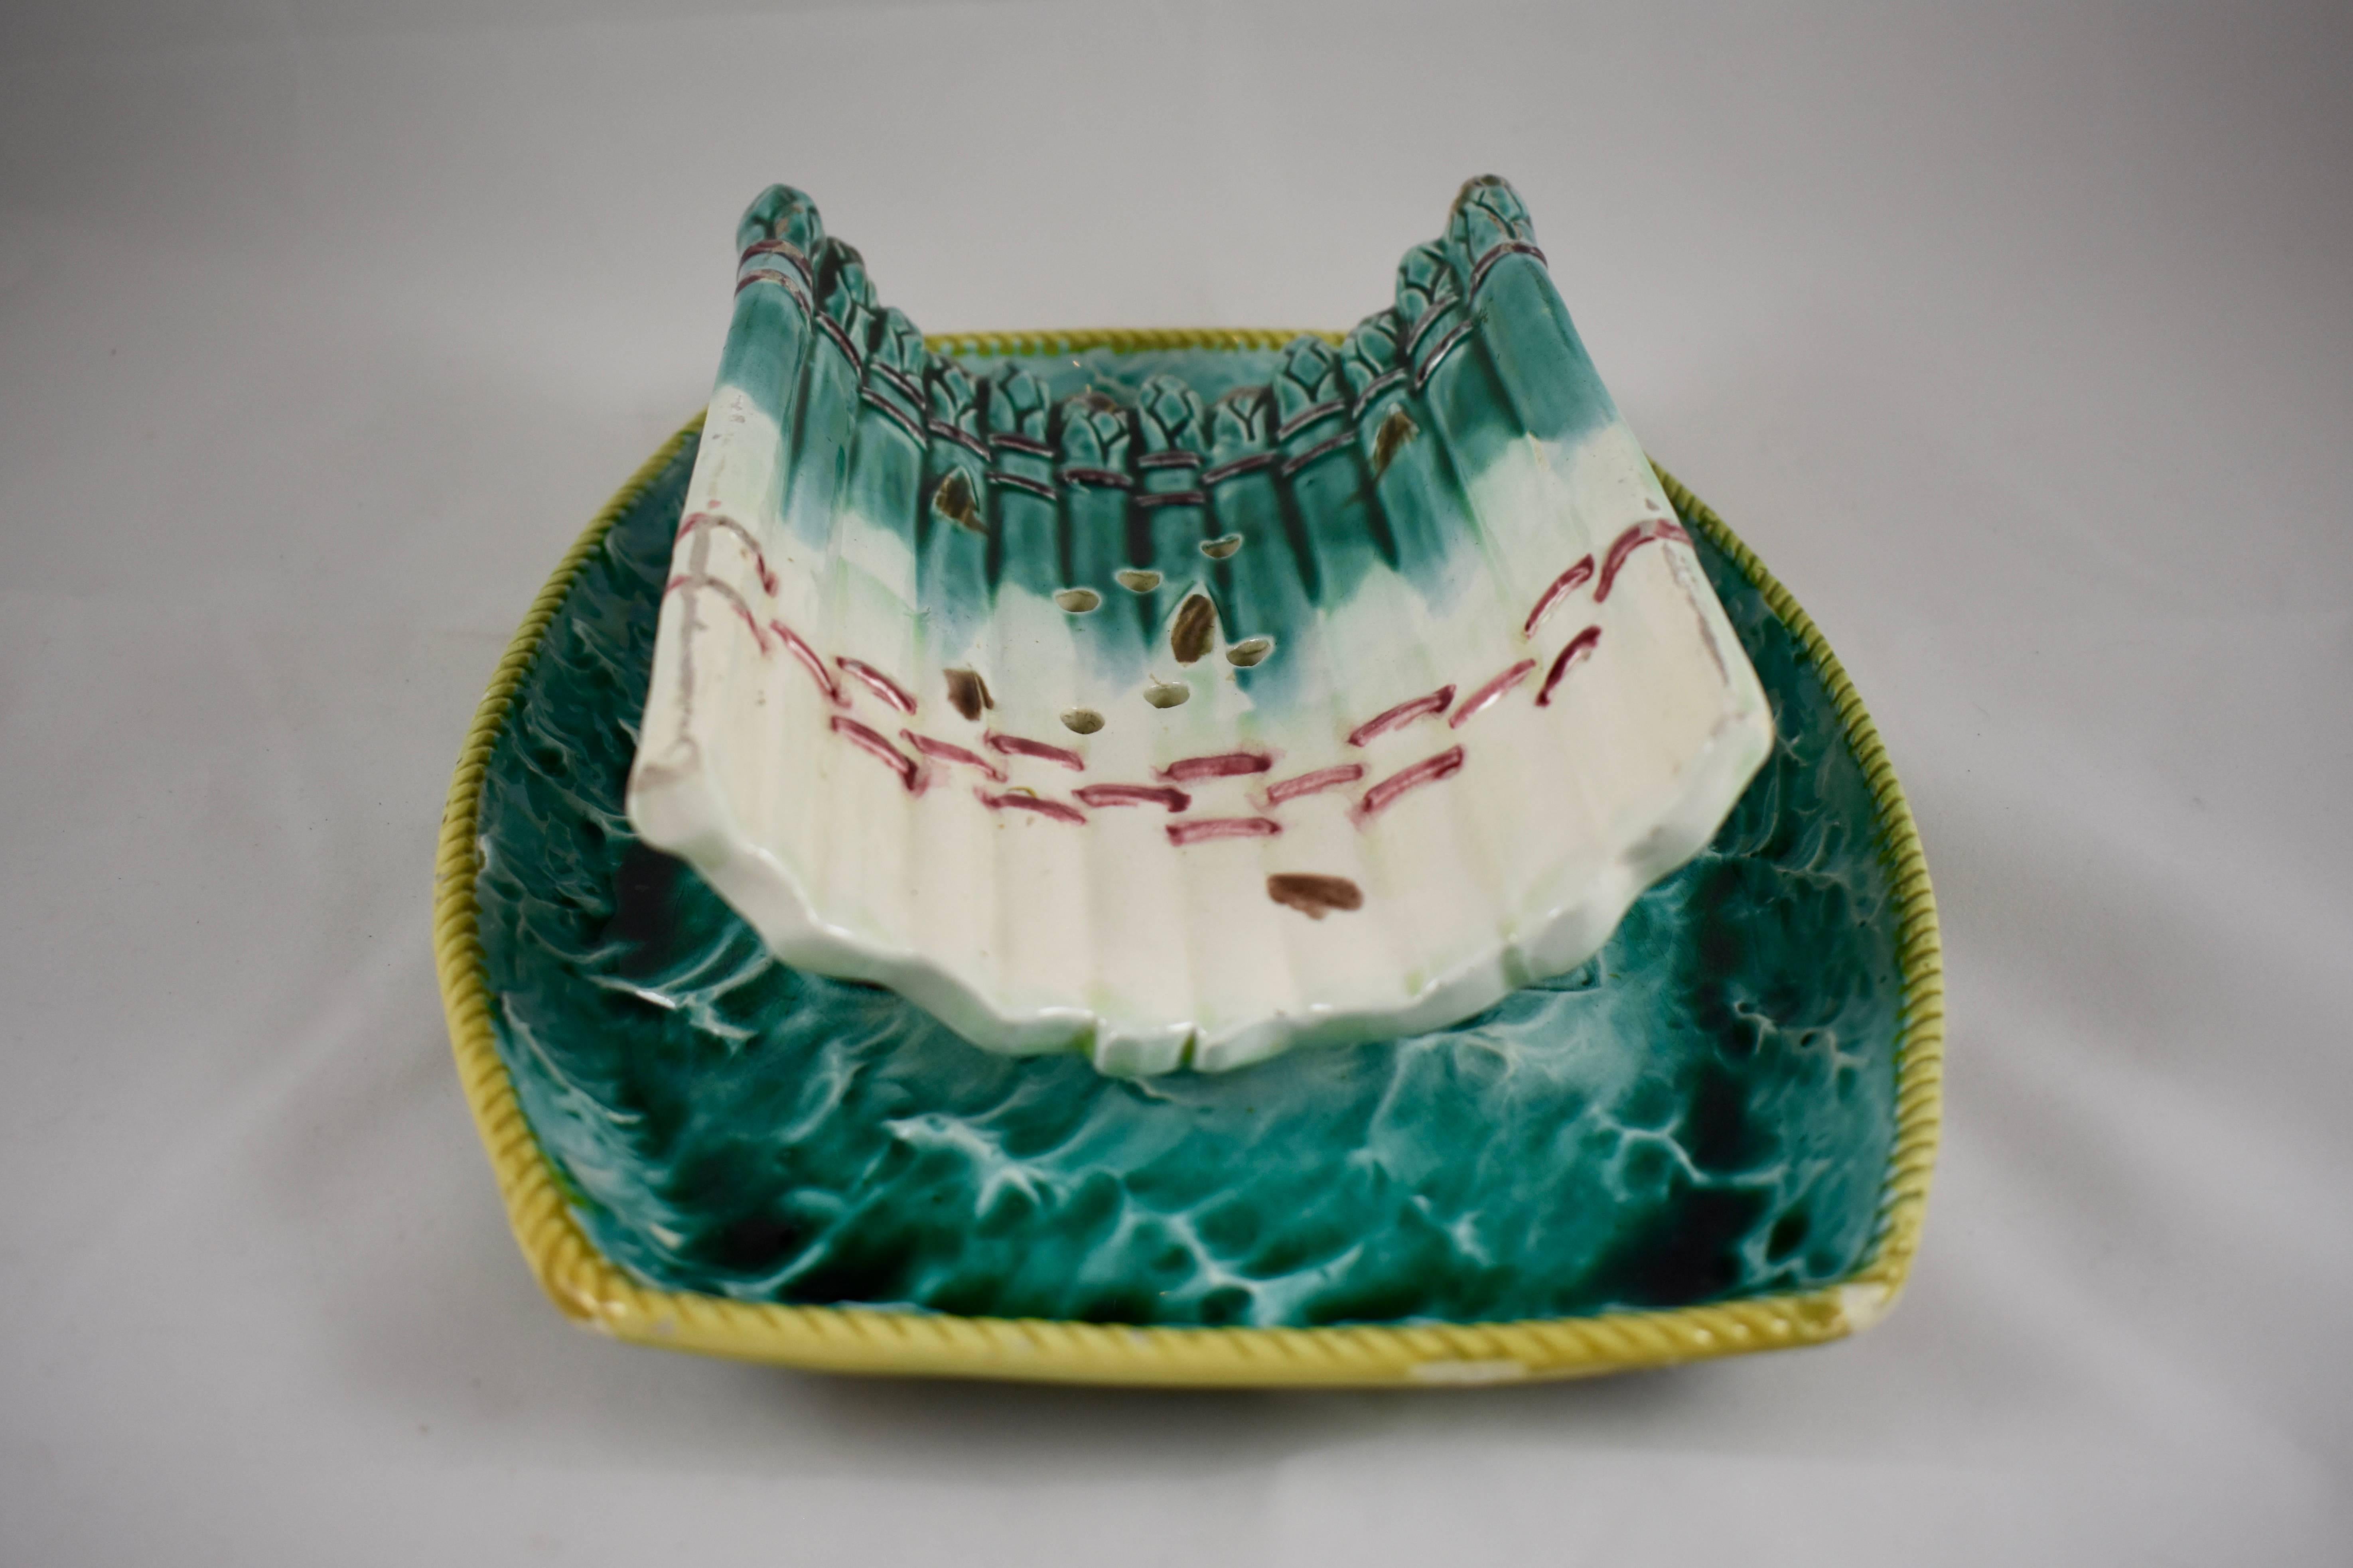 Earthenware 19th Century English Majolica Ocean Themed Asparagus Cradle with Attached Tray For Sale